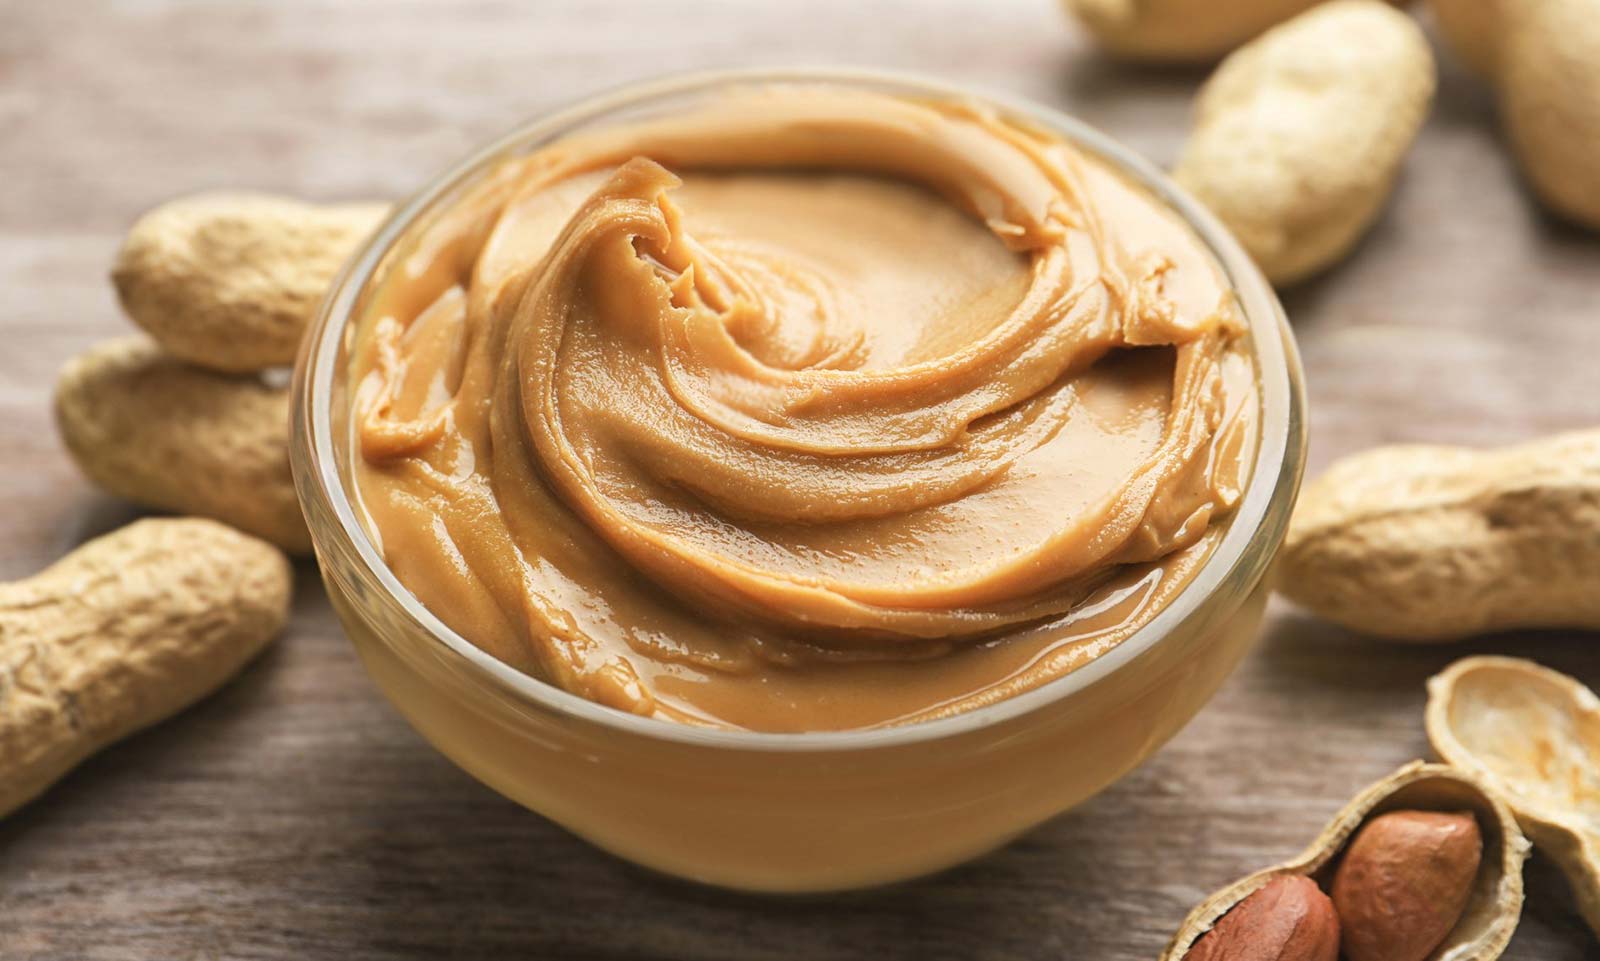 Let’s See What Your Food IQ Is – Can You Get 80% On This Quiz? Peanut butter